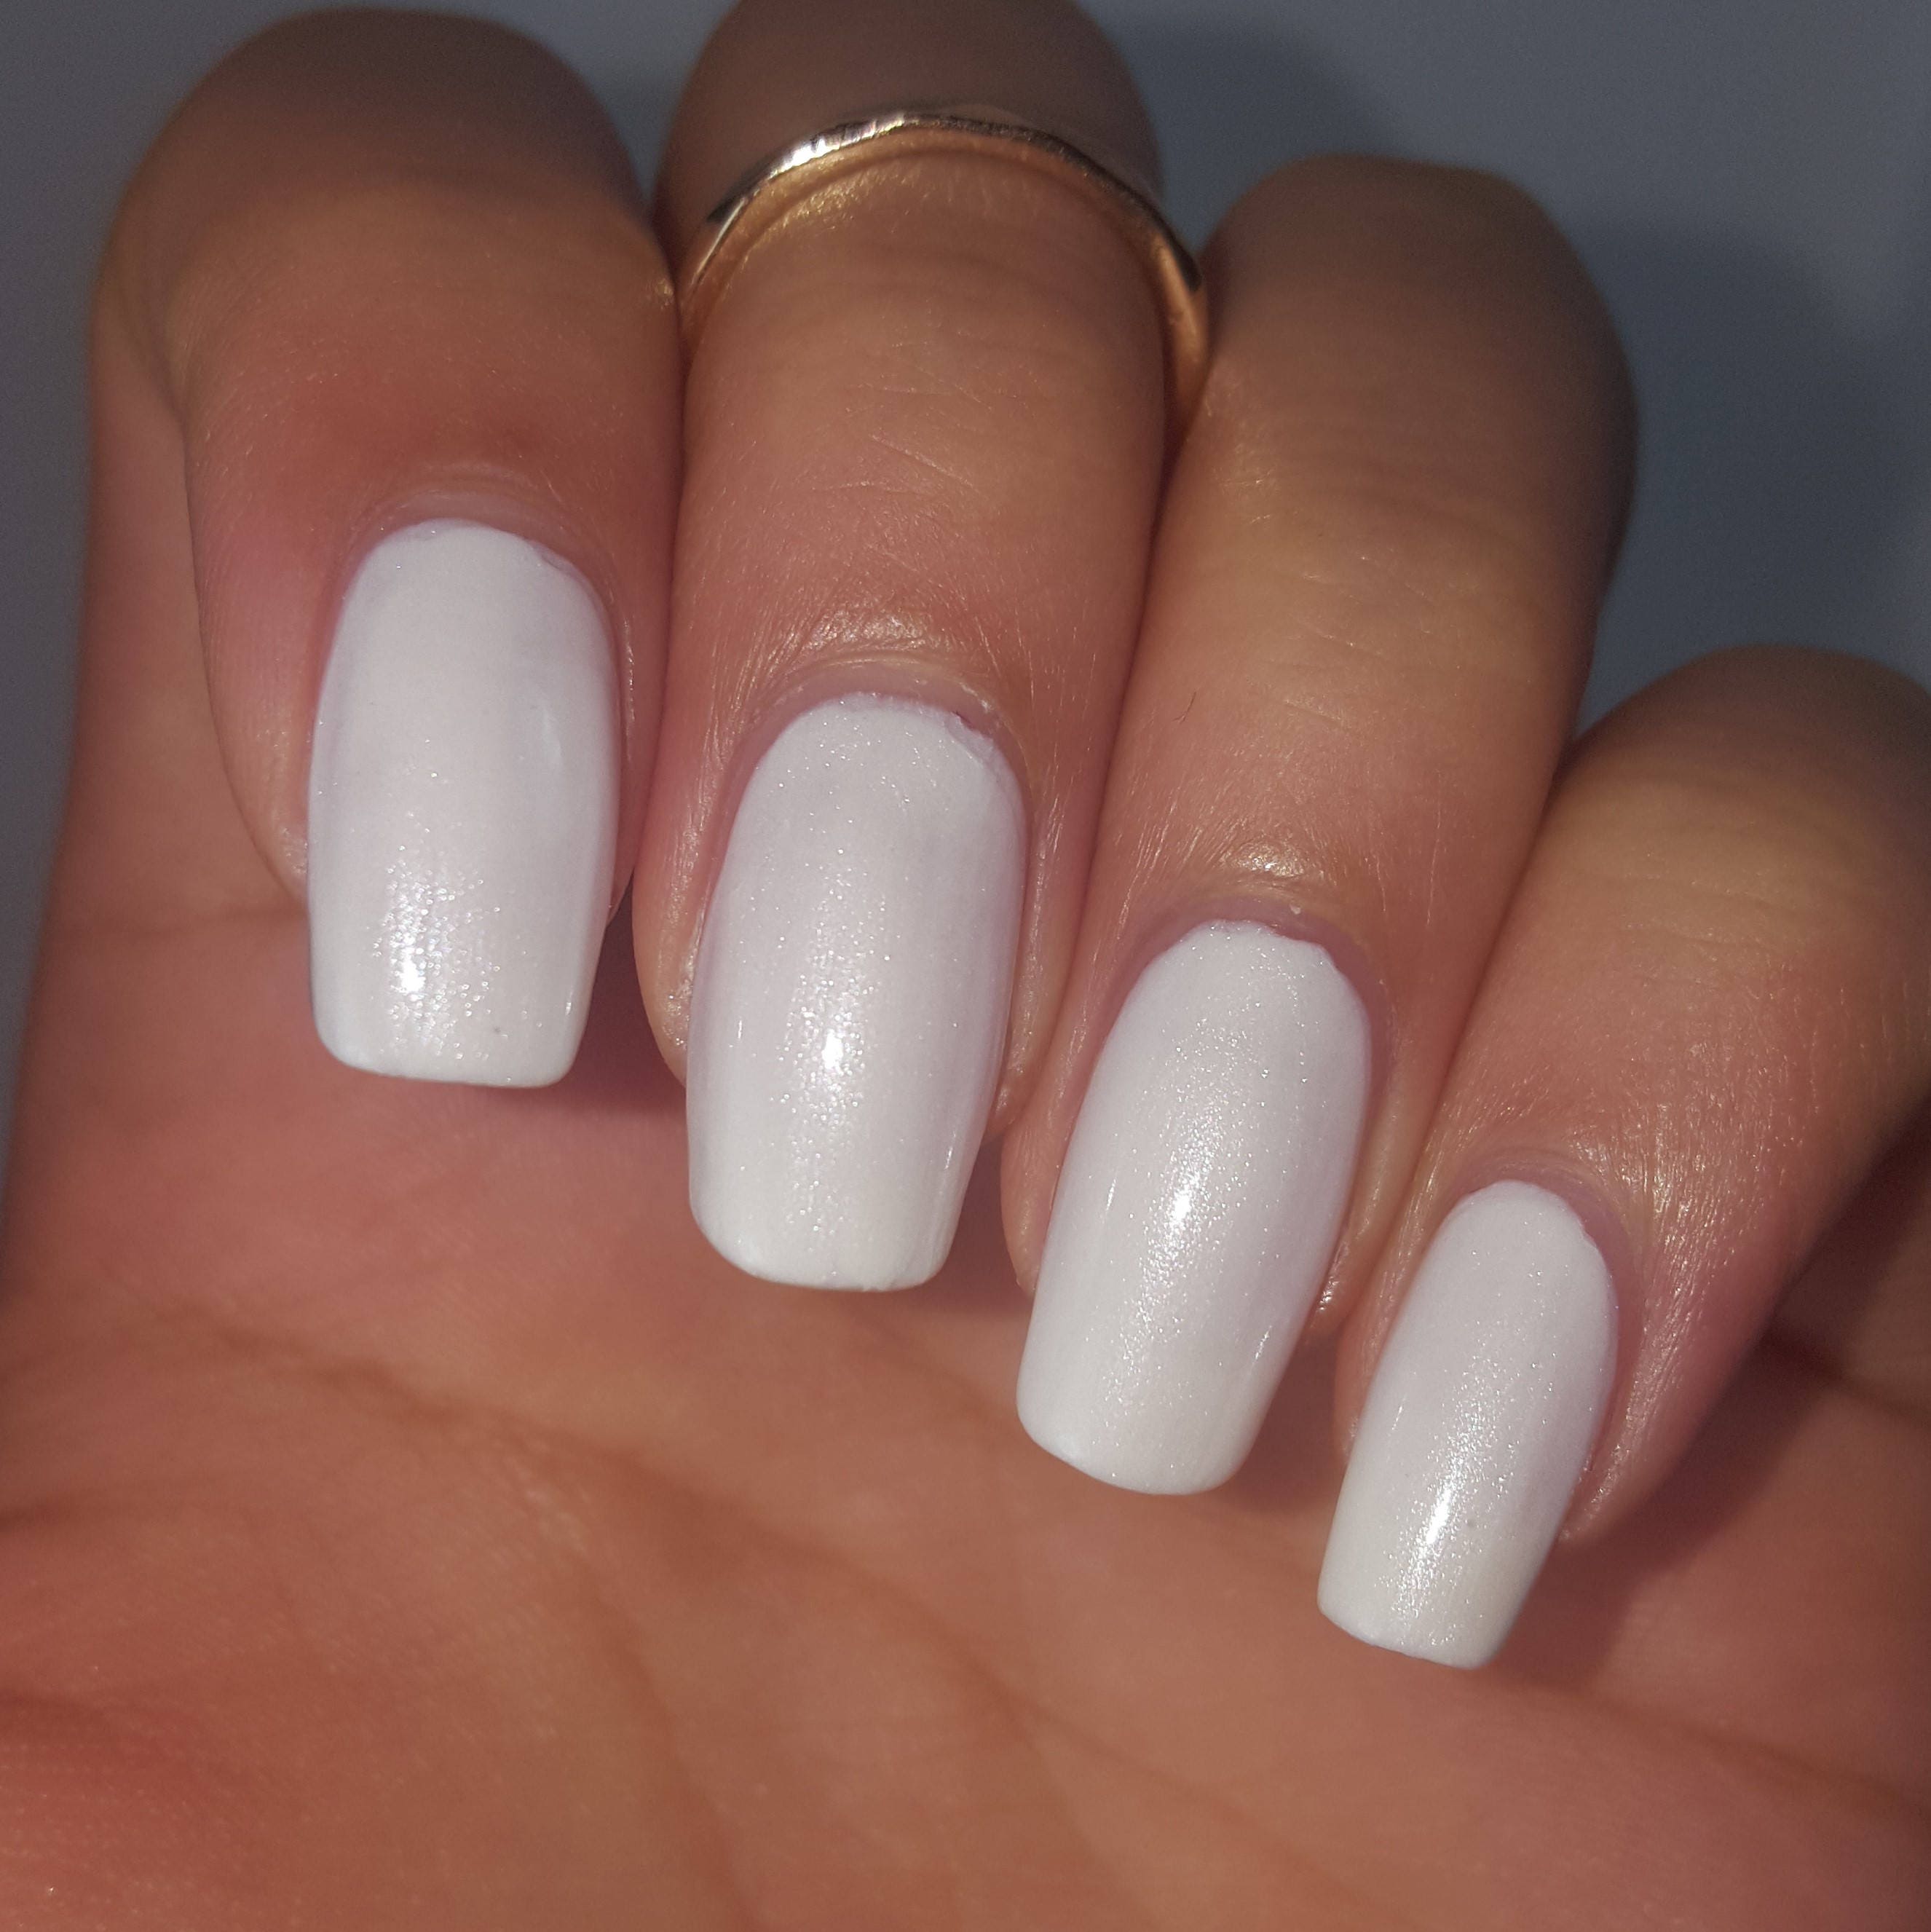 Pearly white acrylic with foil 😍 | Instagram